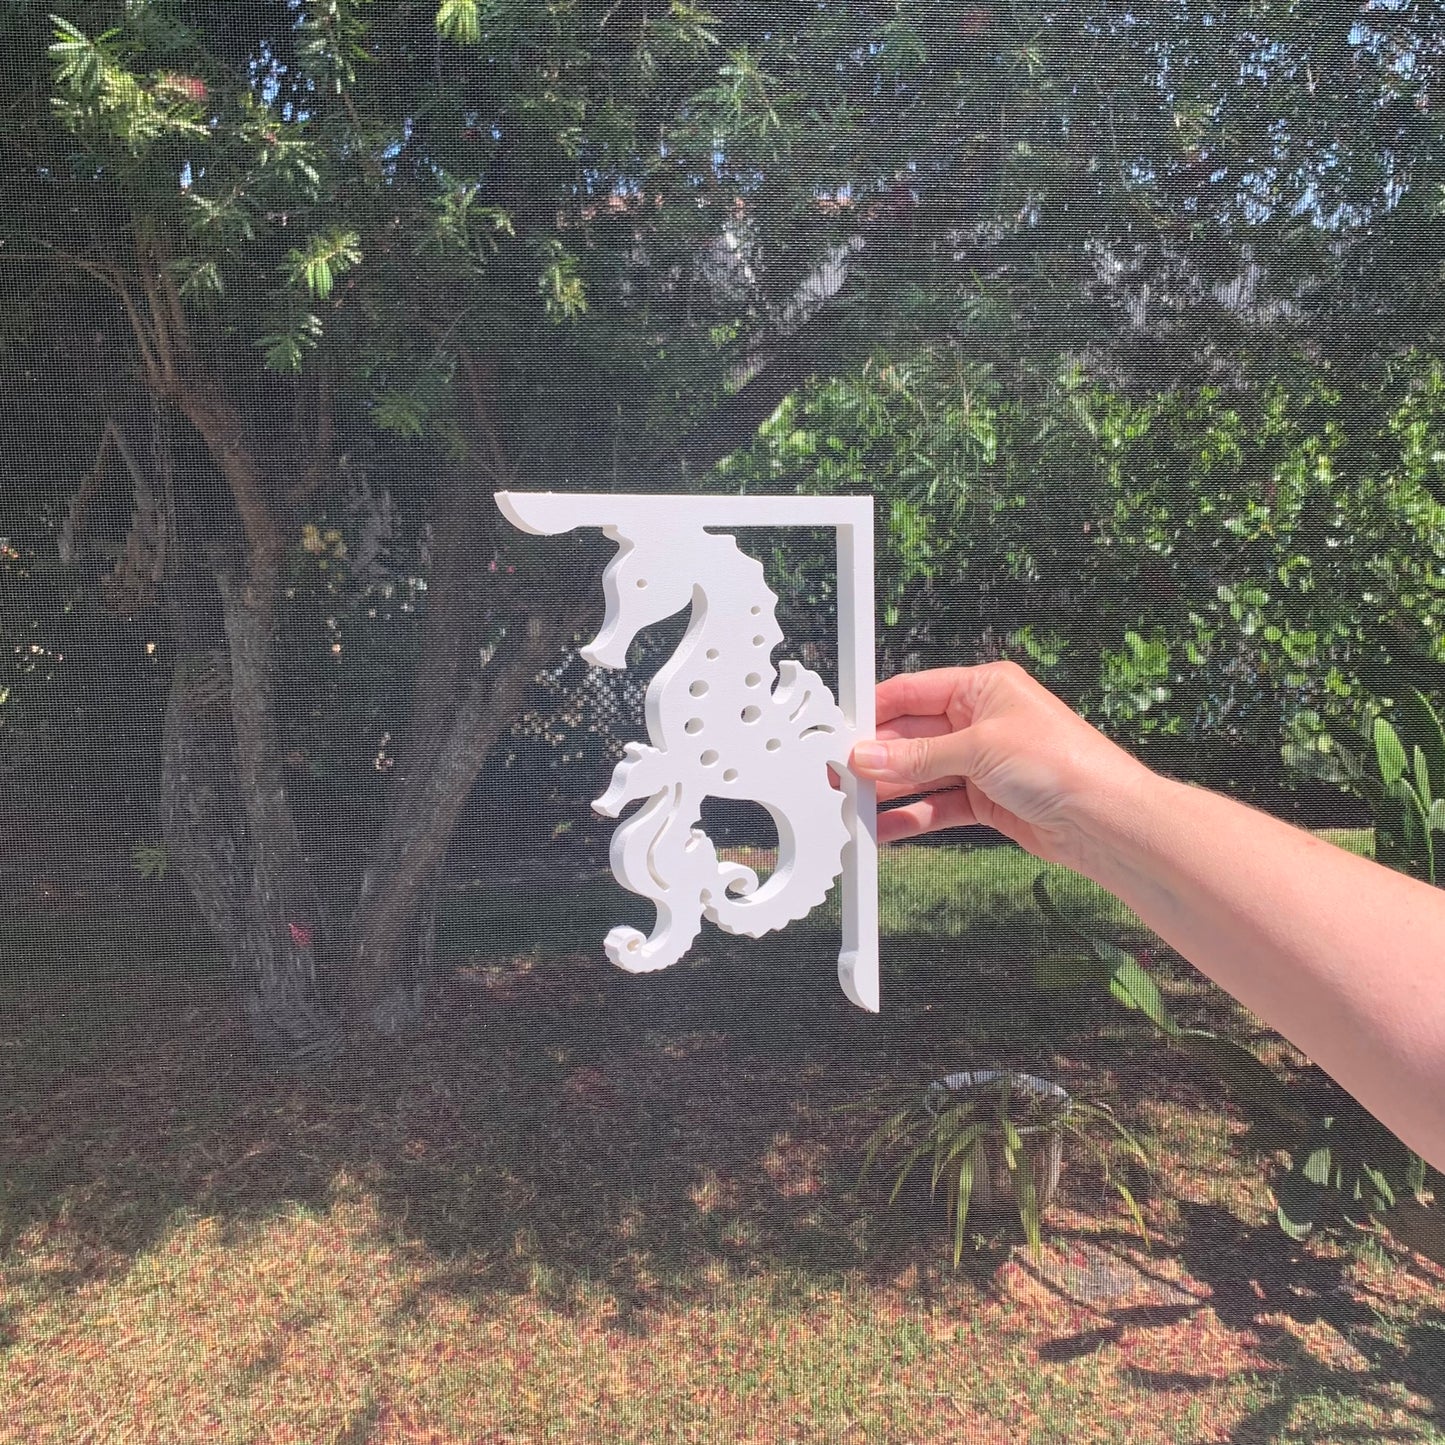 Mailbox Bracket - Seahorse with Baby Small 7x9 inch, Custom Mailbox, Coastal, Tropical, Bracket, Outdoor Decor, Mailbox & Post Not Included